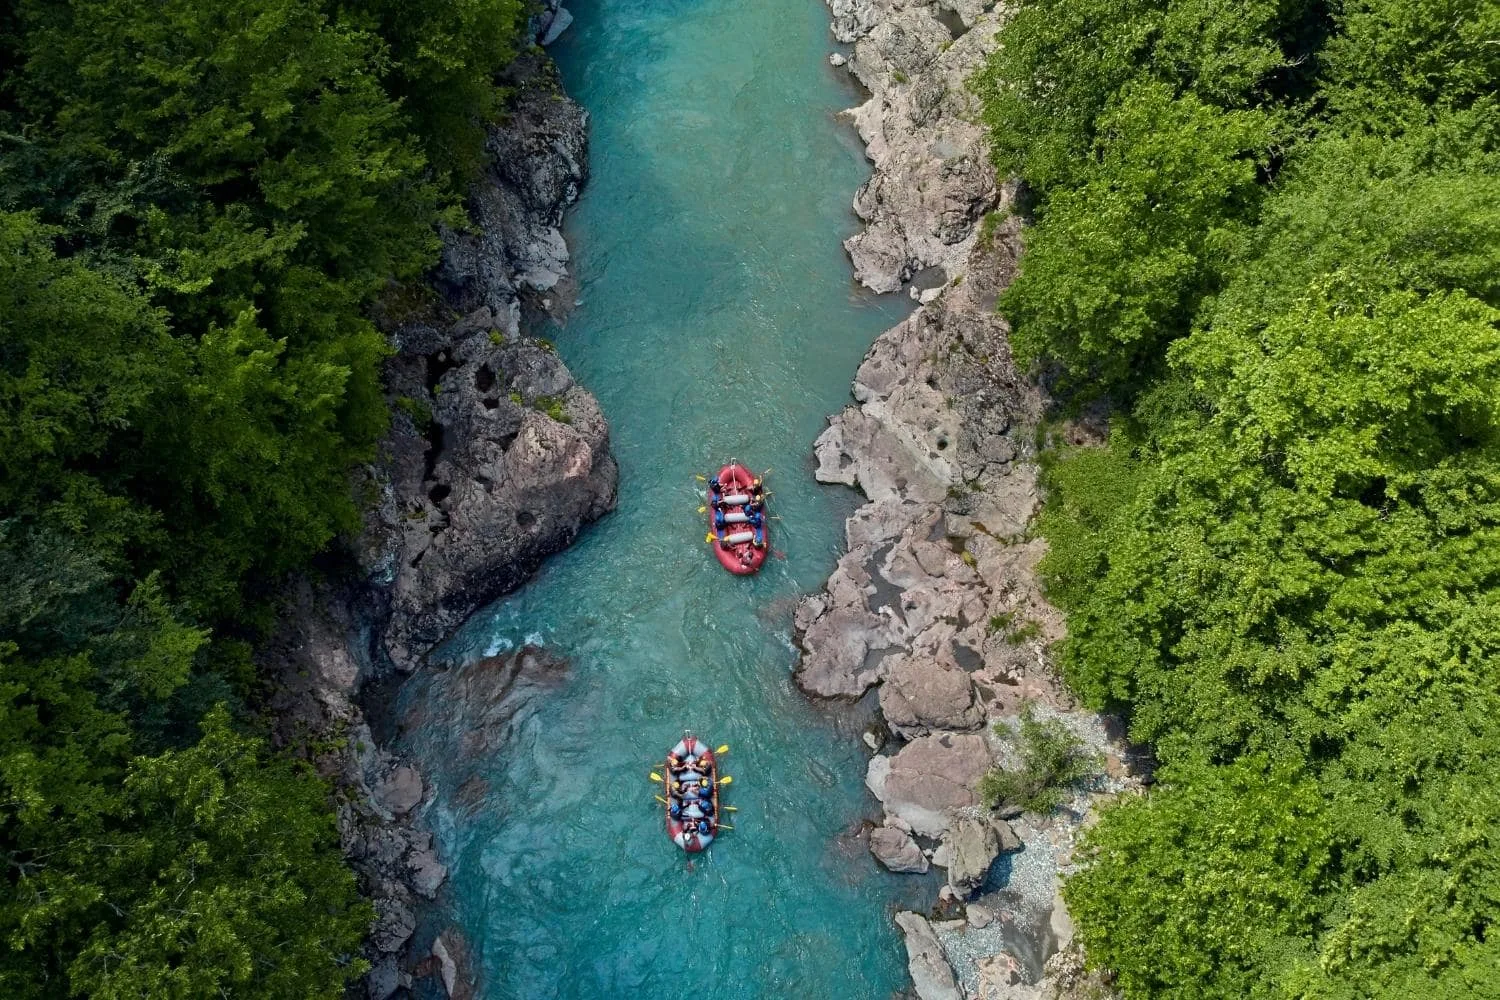 People going white water rafting down a river